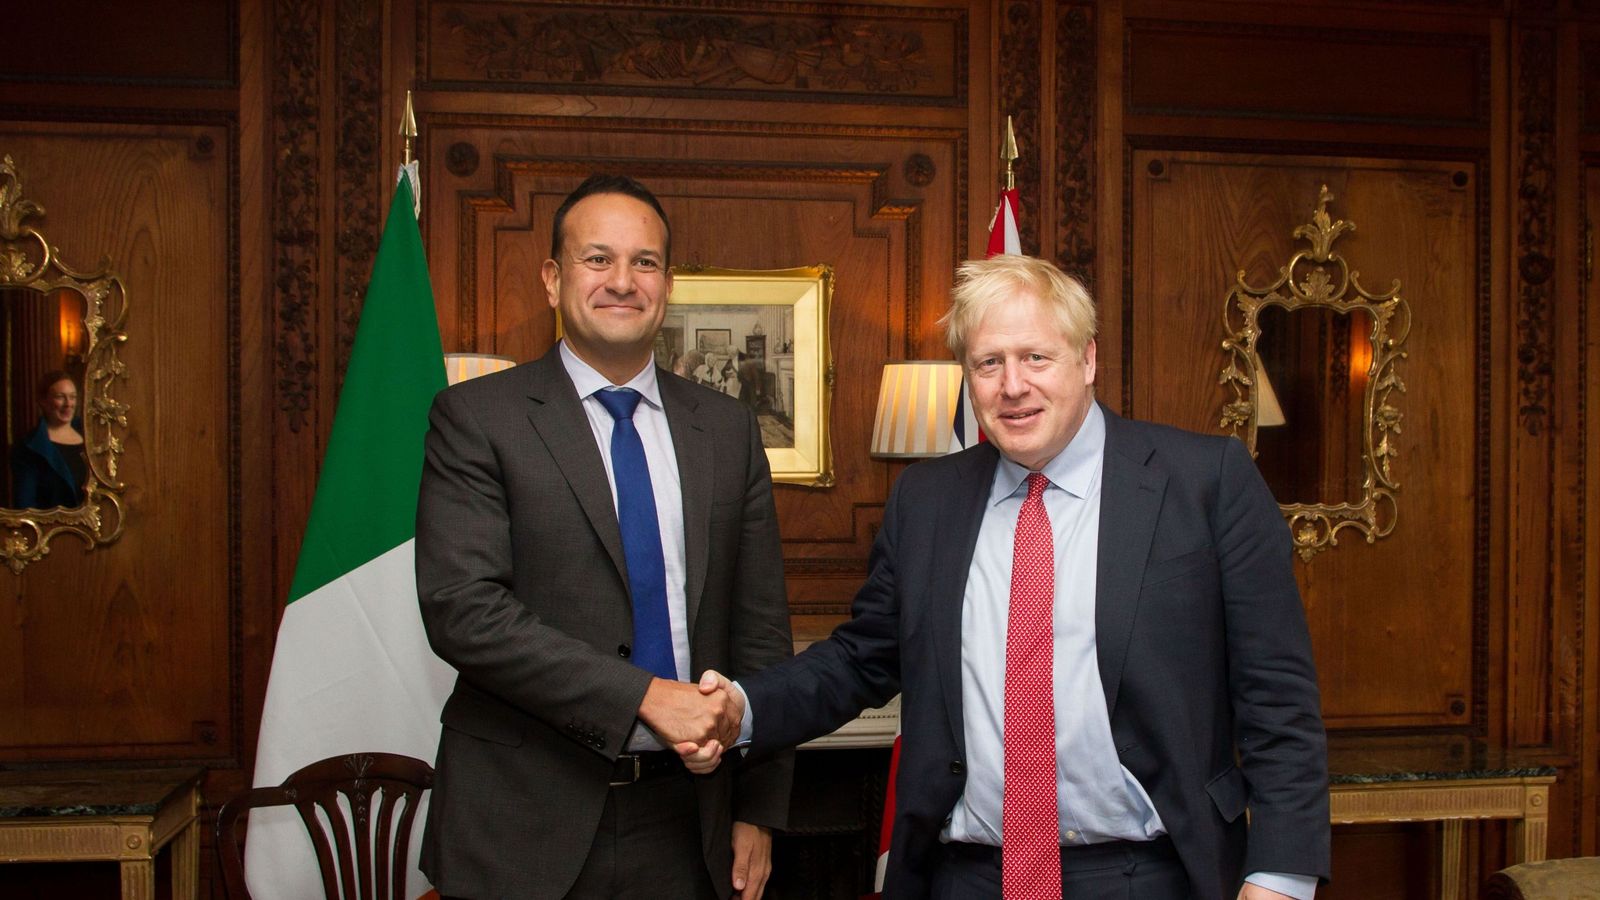 “Johnson is putting the UK at risk,” adds Varadkar, because of the Northern Ireland protocol.